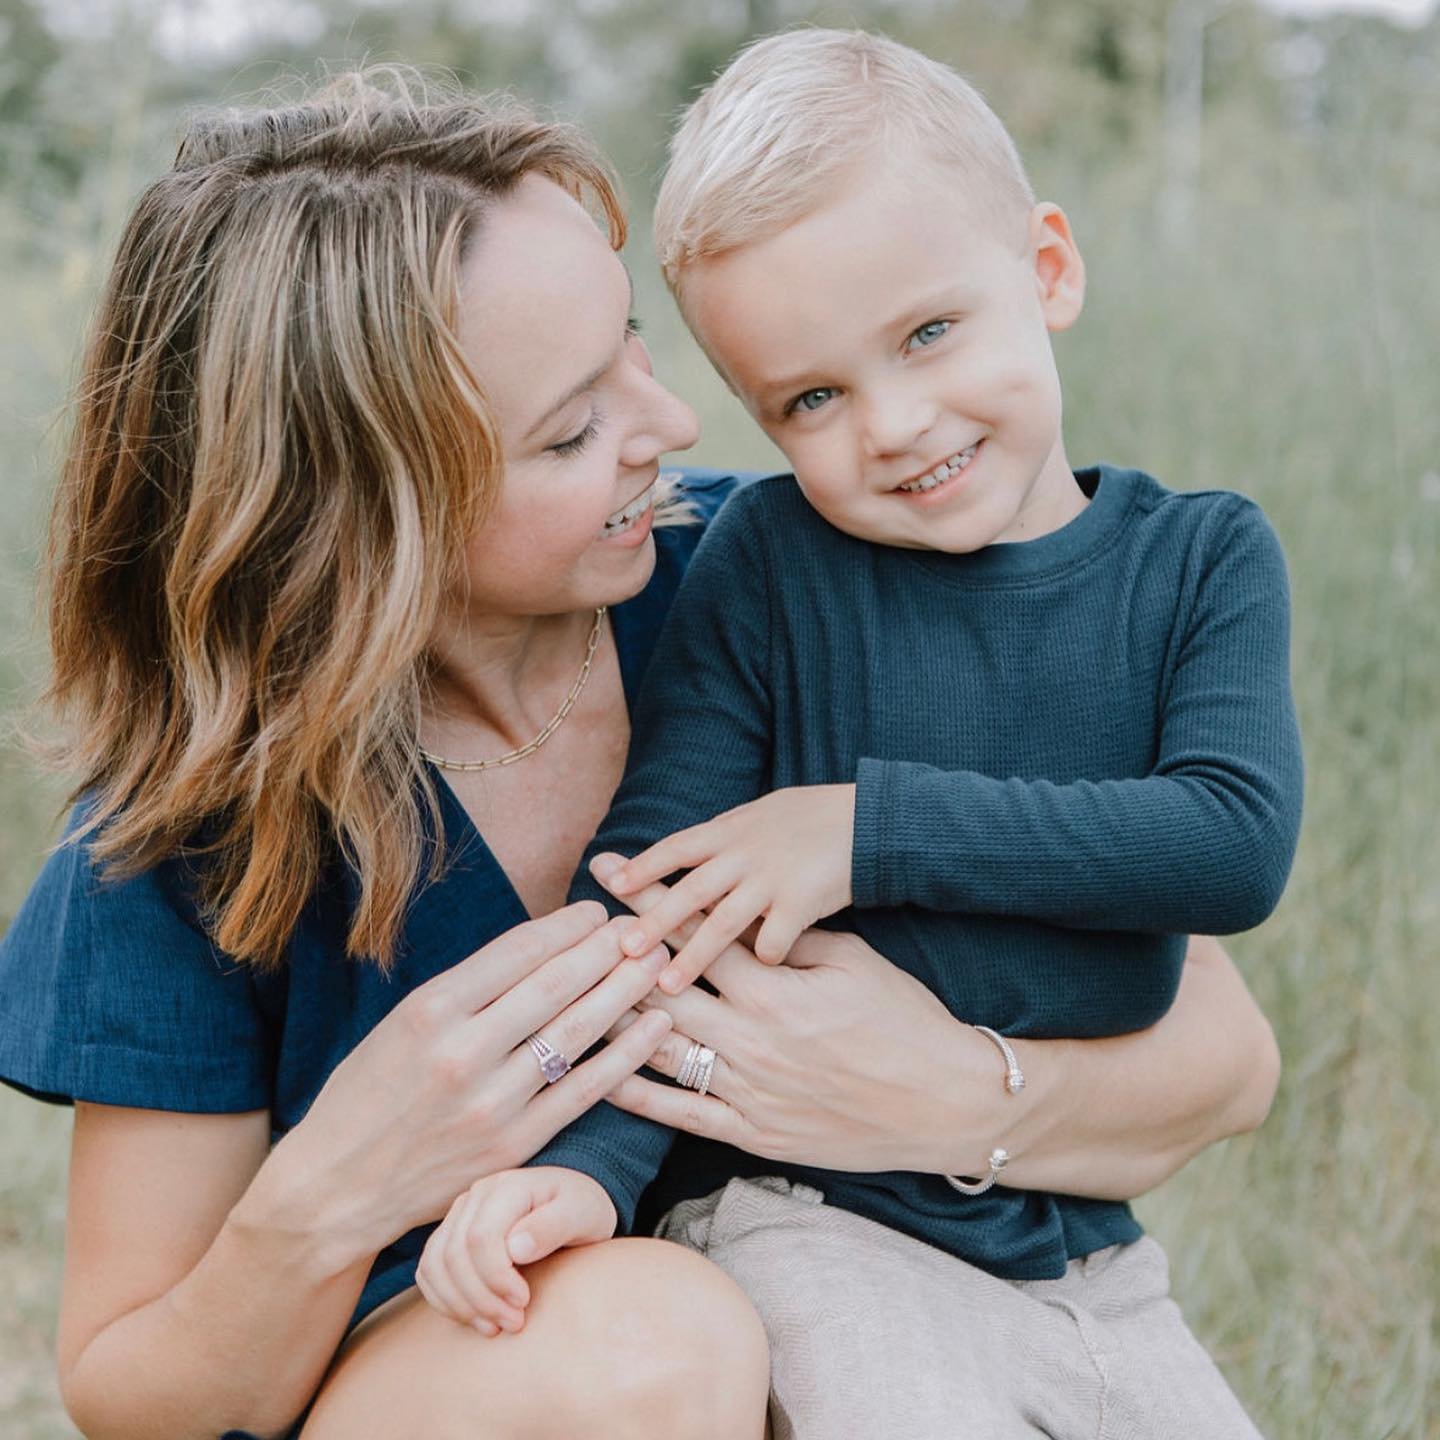 Here&rsquo;s a friendly reminder that Mother&rsquo;s Day is coming up in less than two weeks. Give mom the gift of being IN the pictures by gifting her a photo shoot this year! Available in any amount via a customized certificate for printing.